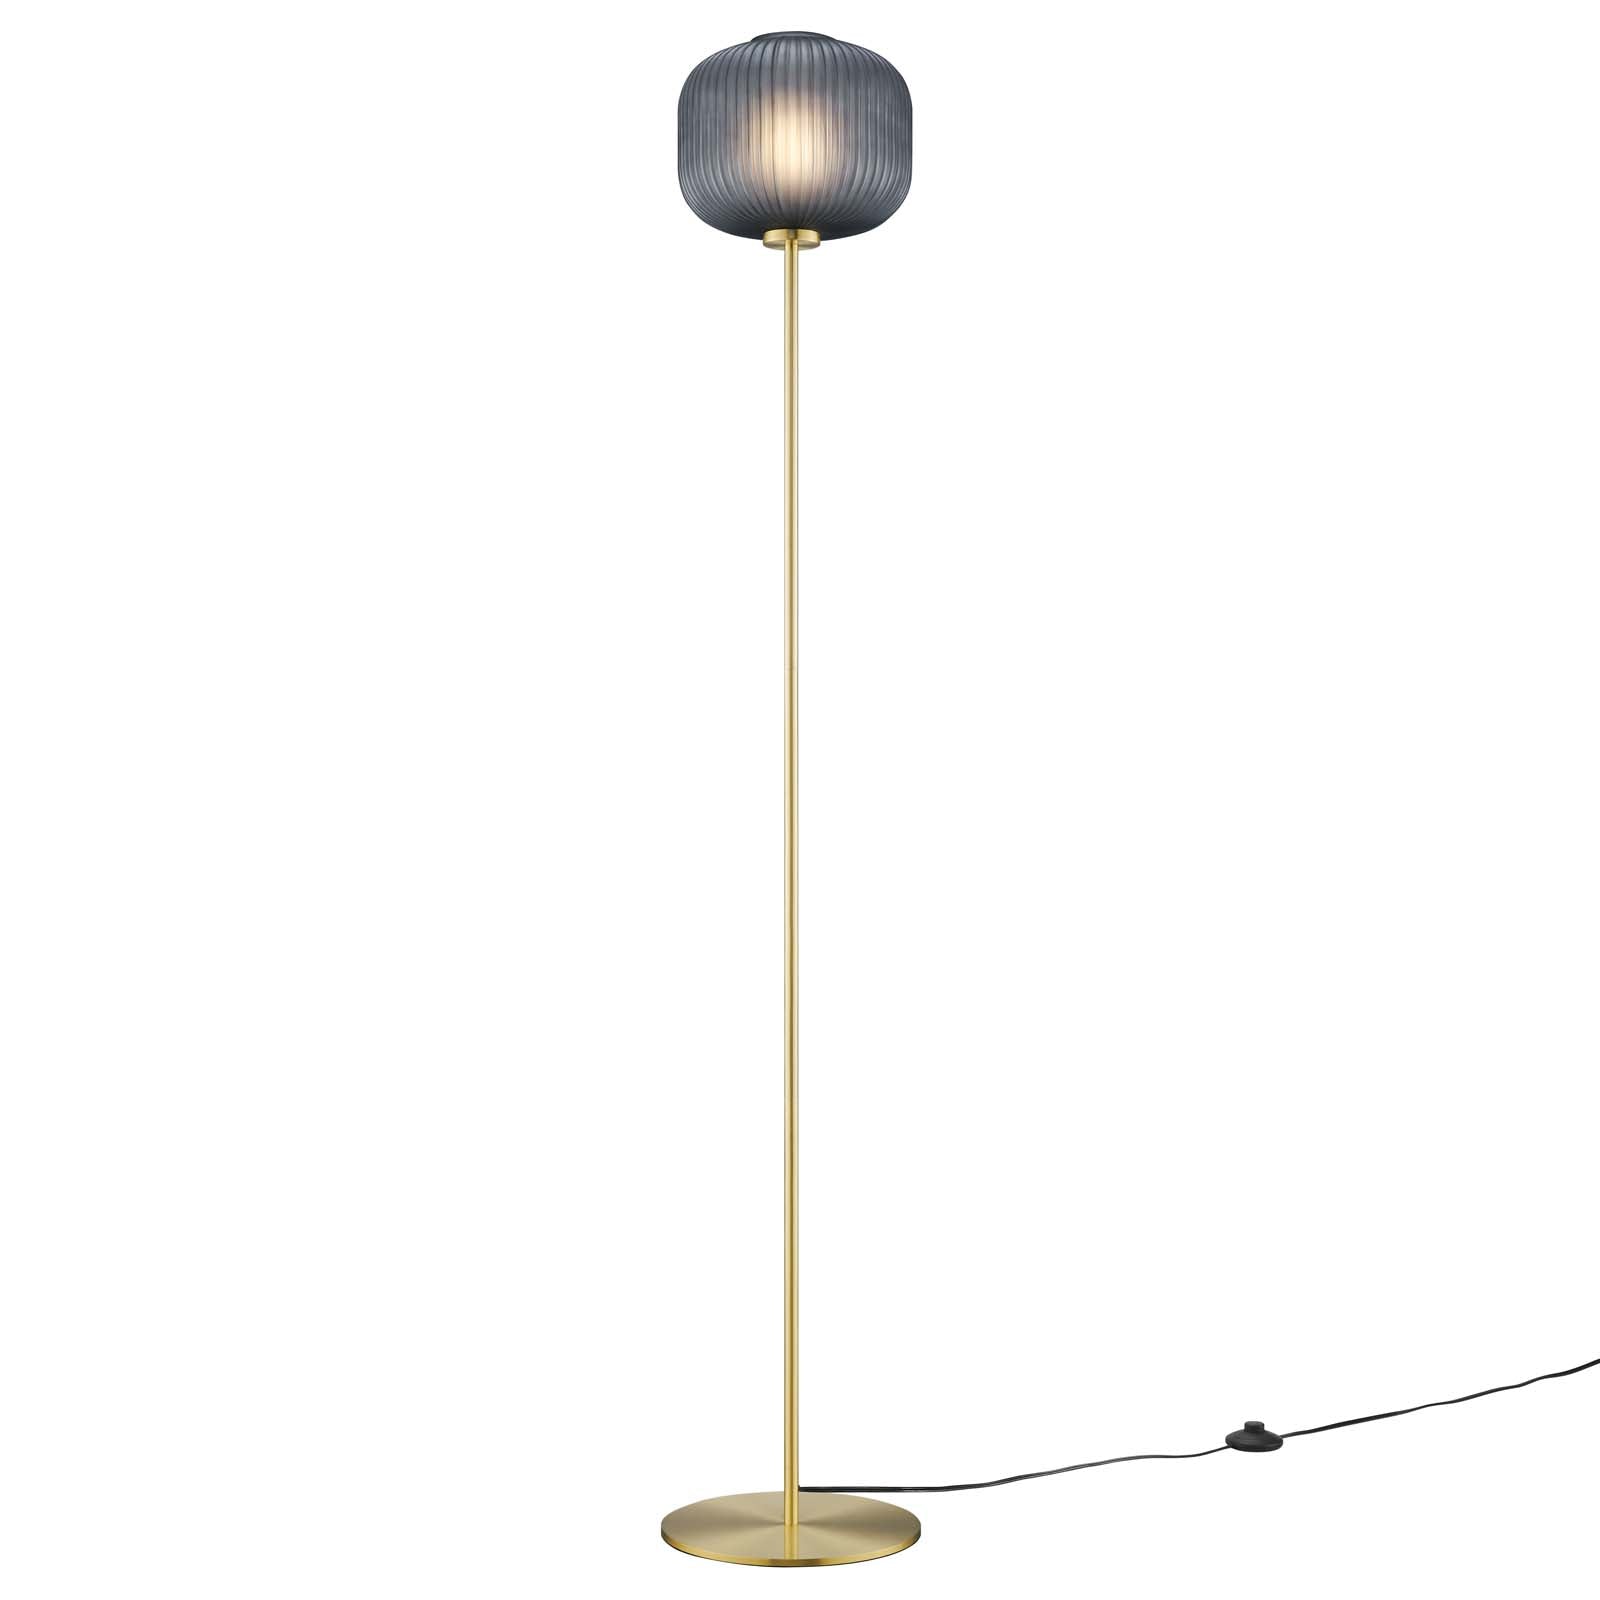 Modway Floor Lamps - Reprise Glass Sphere Glass And Metal Floor Lamp Black Satin Brass